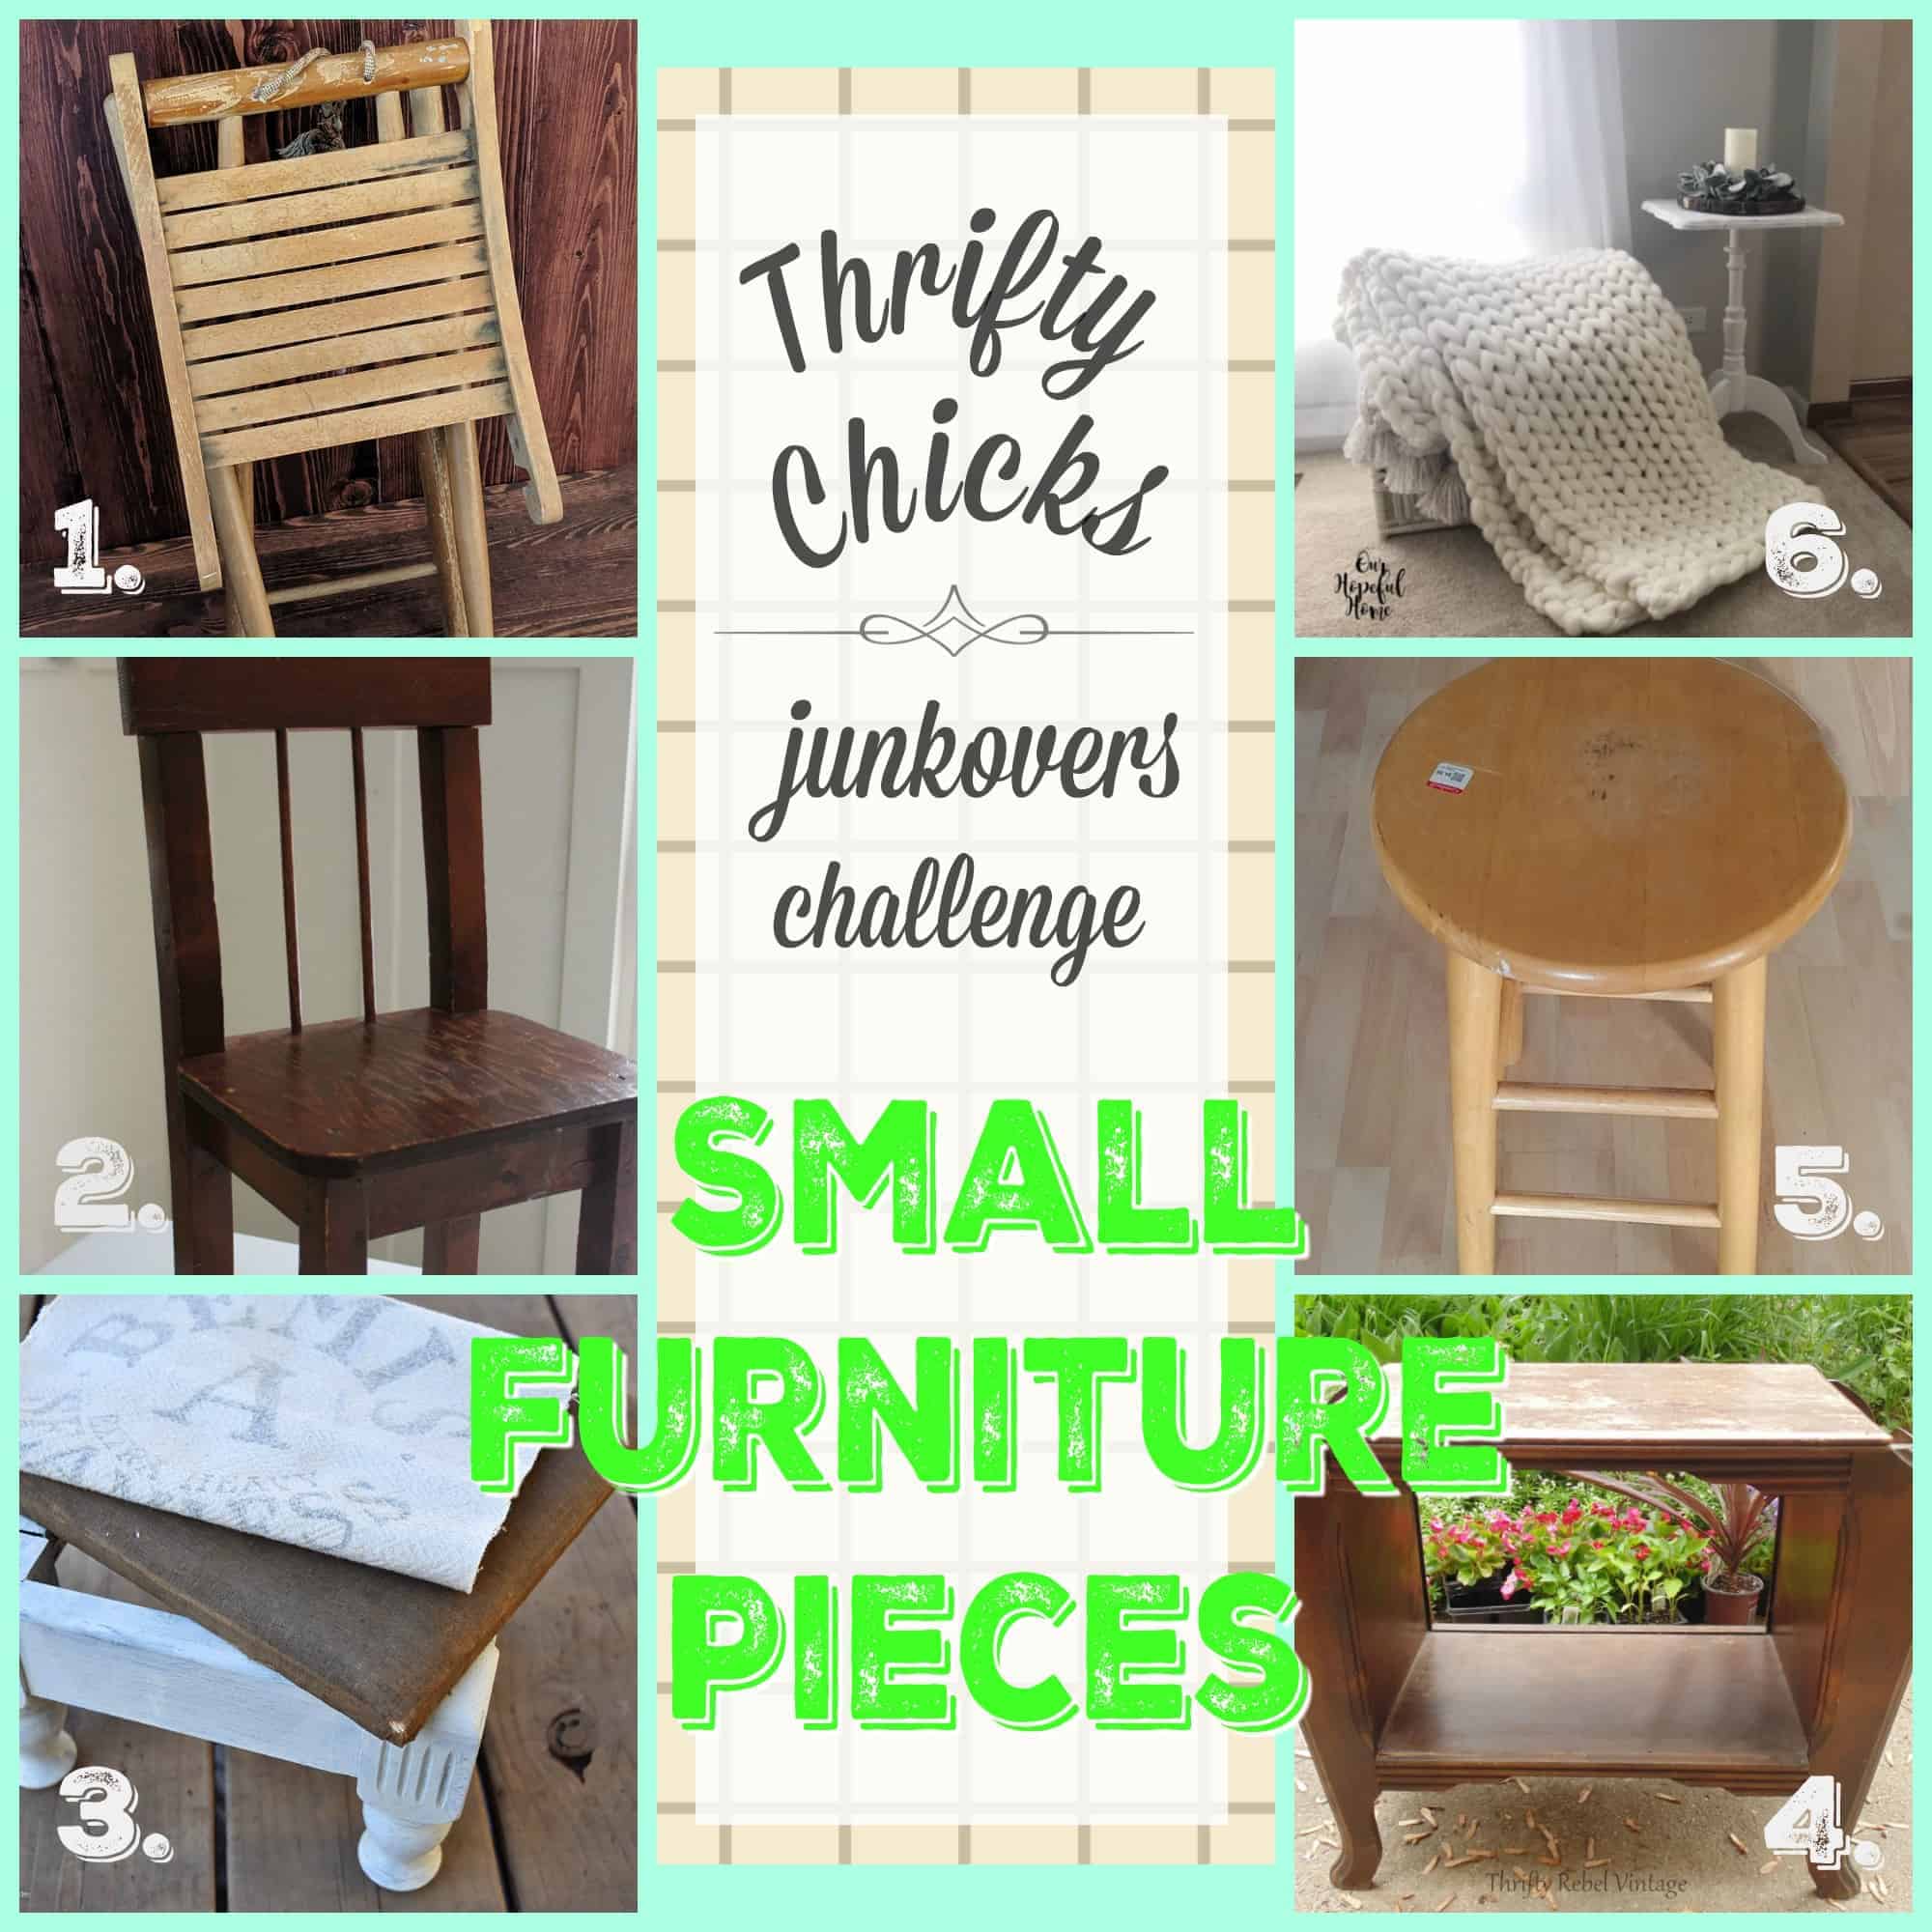 Thrifty Chicks junkover challenges